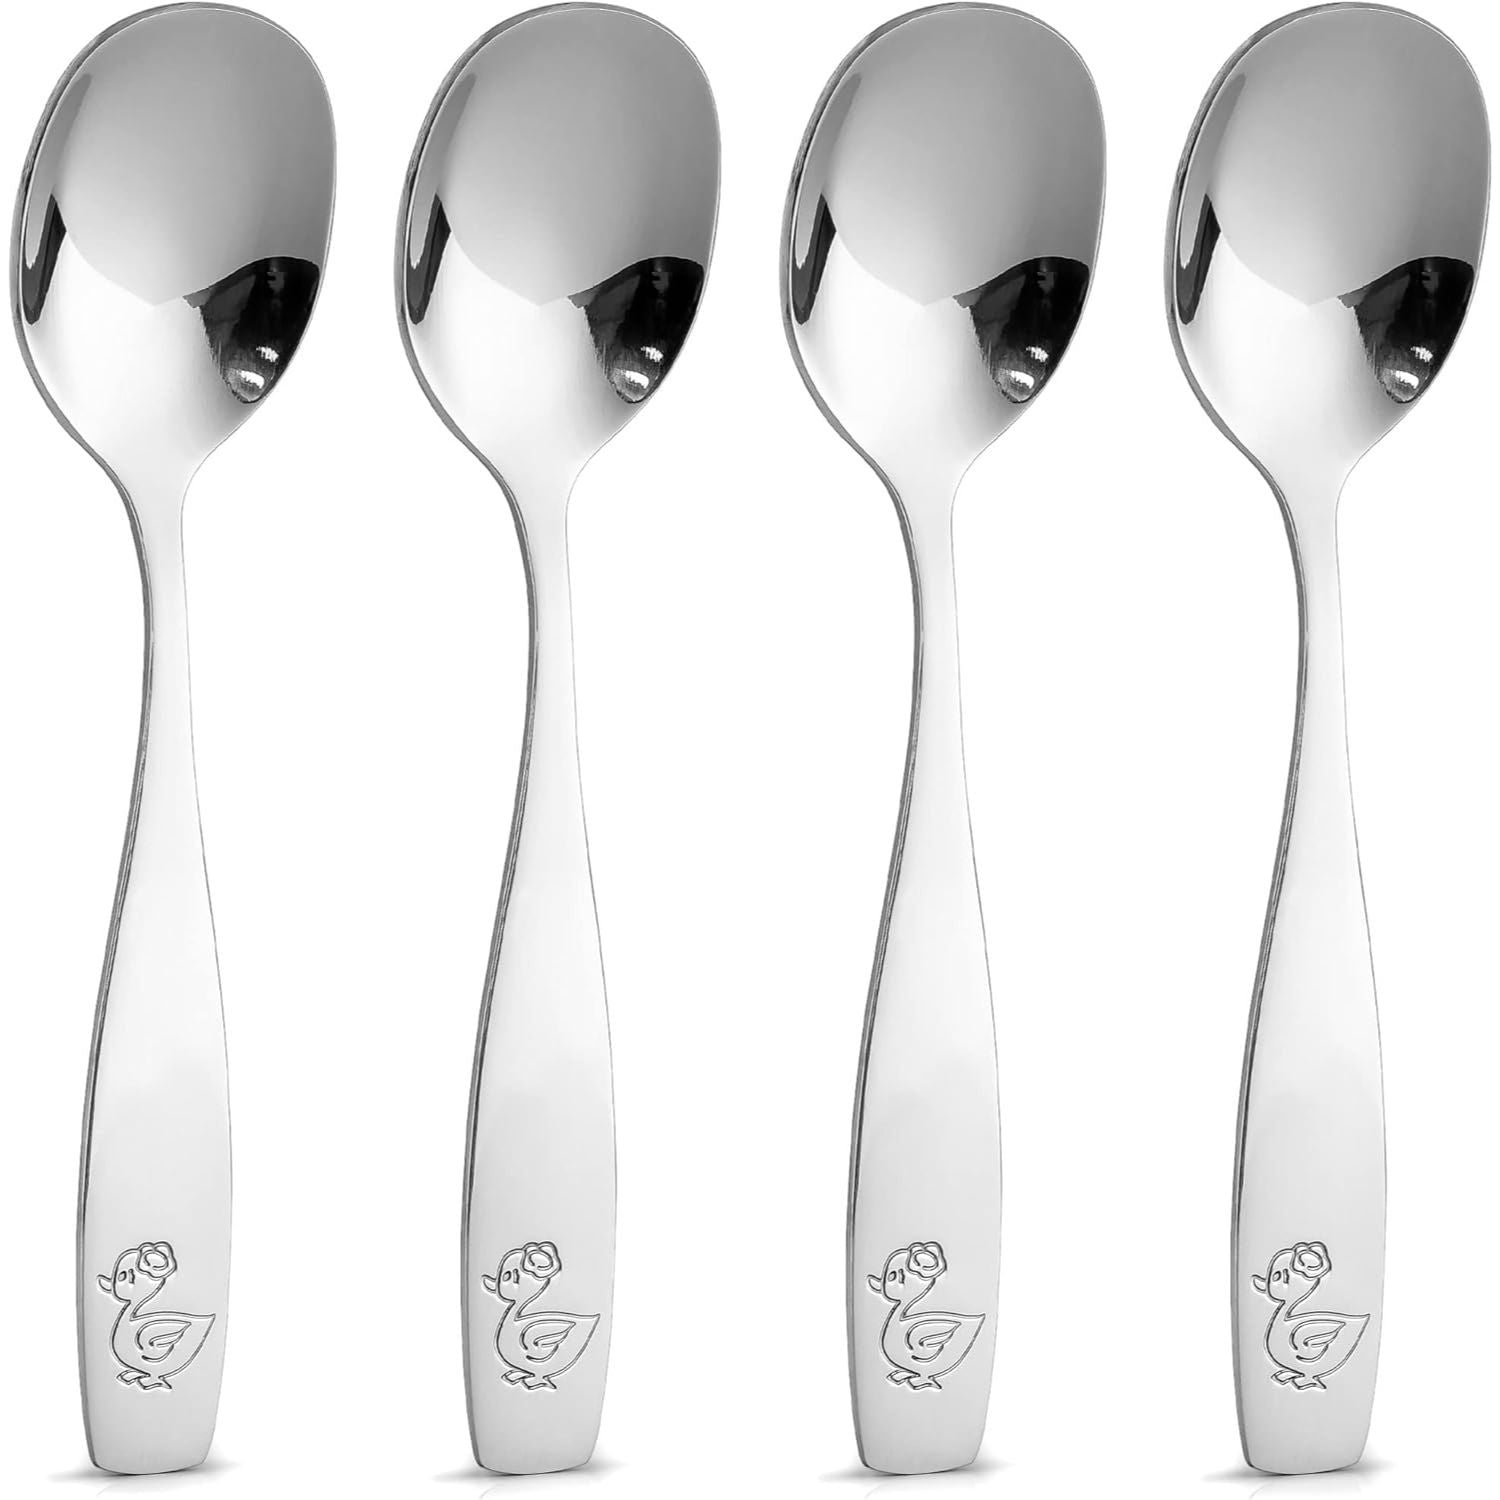 Baby Utensils Toddler Learning Feeding Spoon And Fork Gadgets